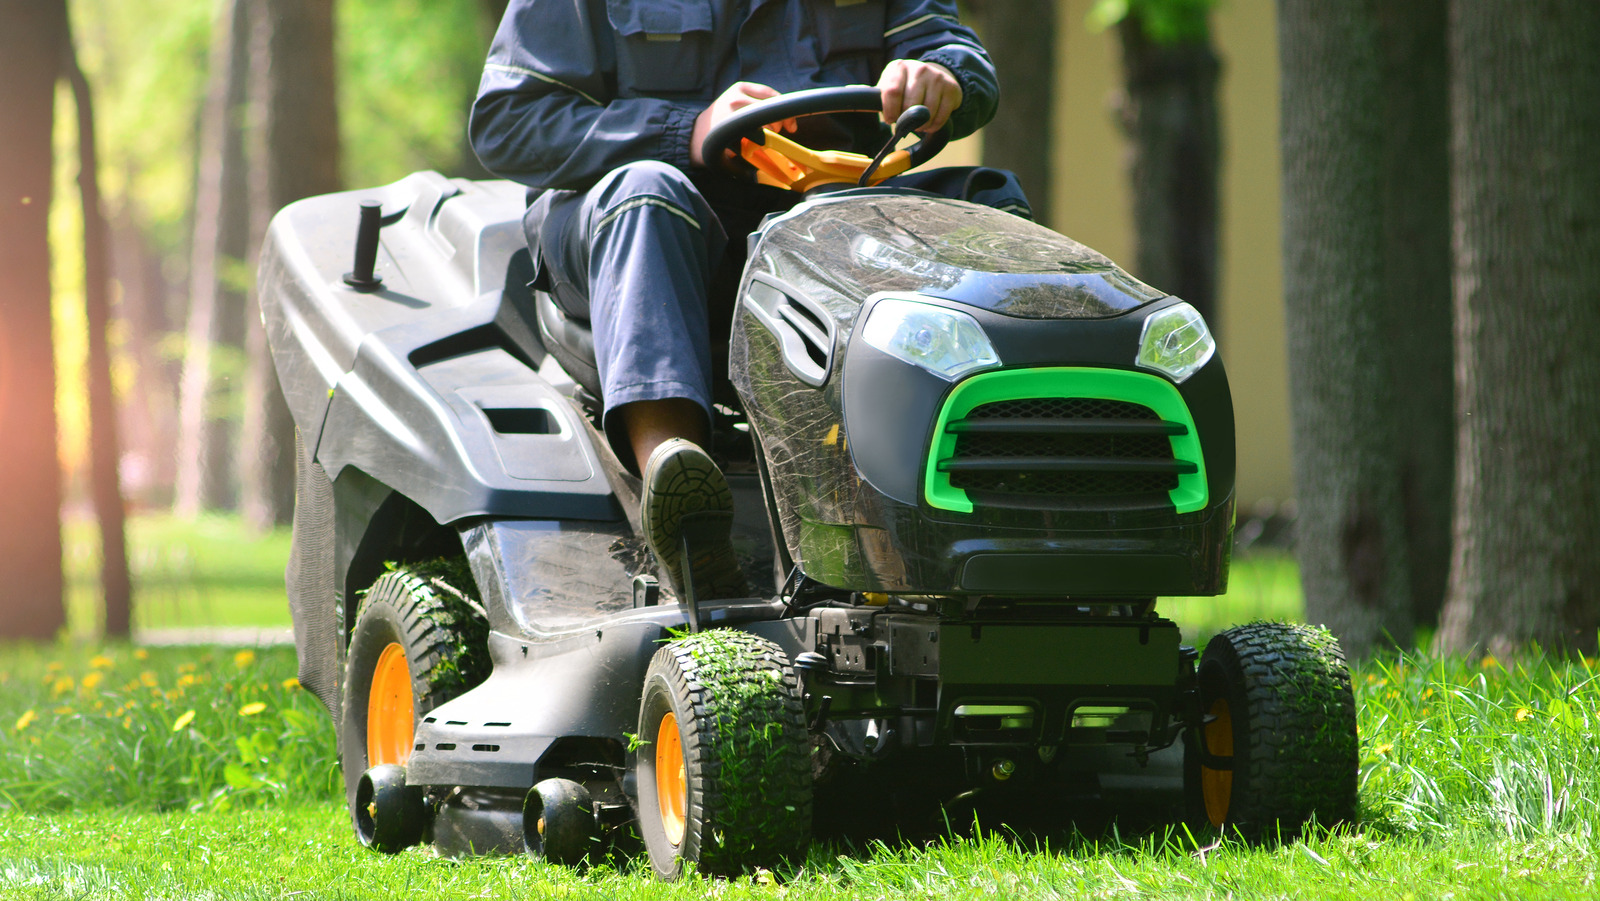 Are Murray Riding Lawn Mowers Any Good? What We Know